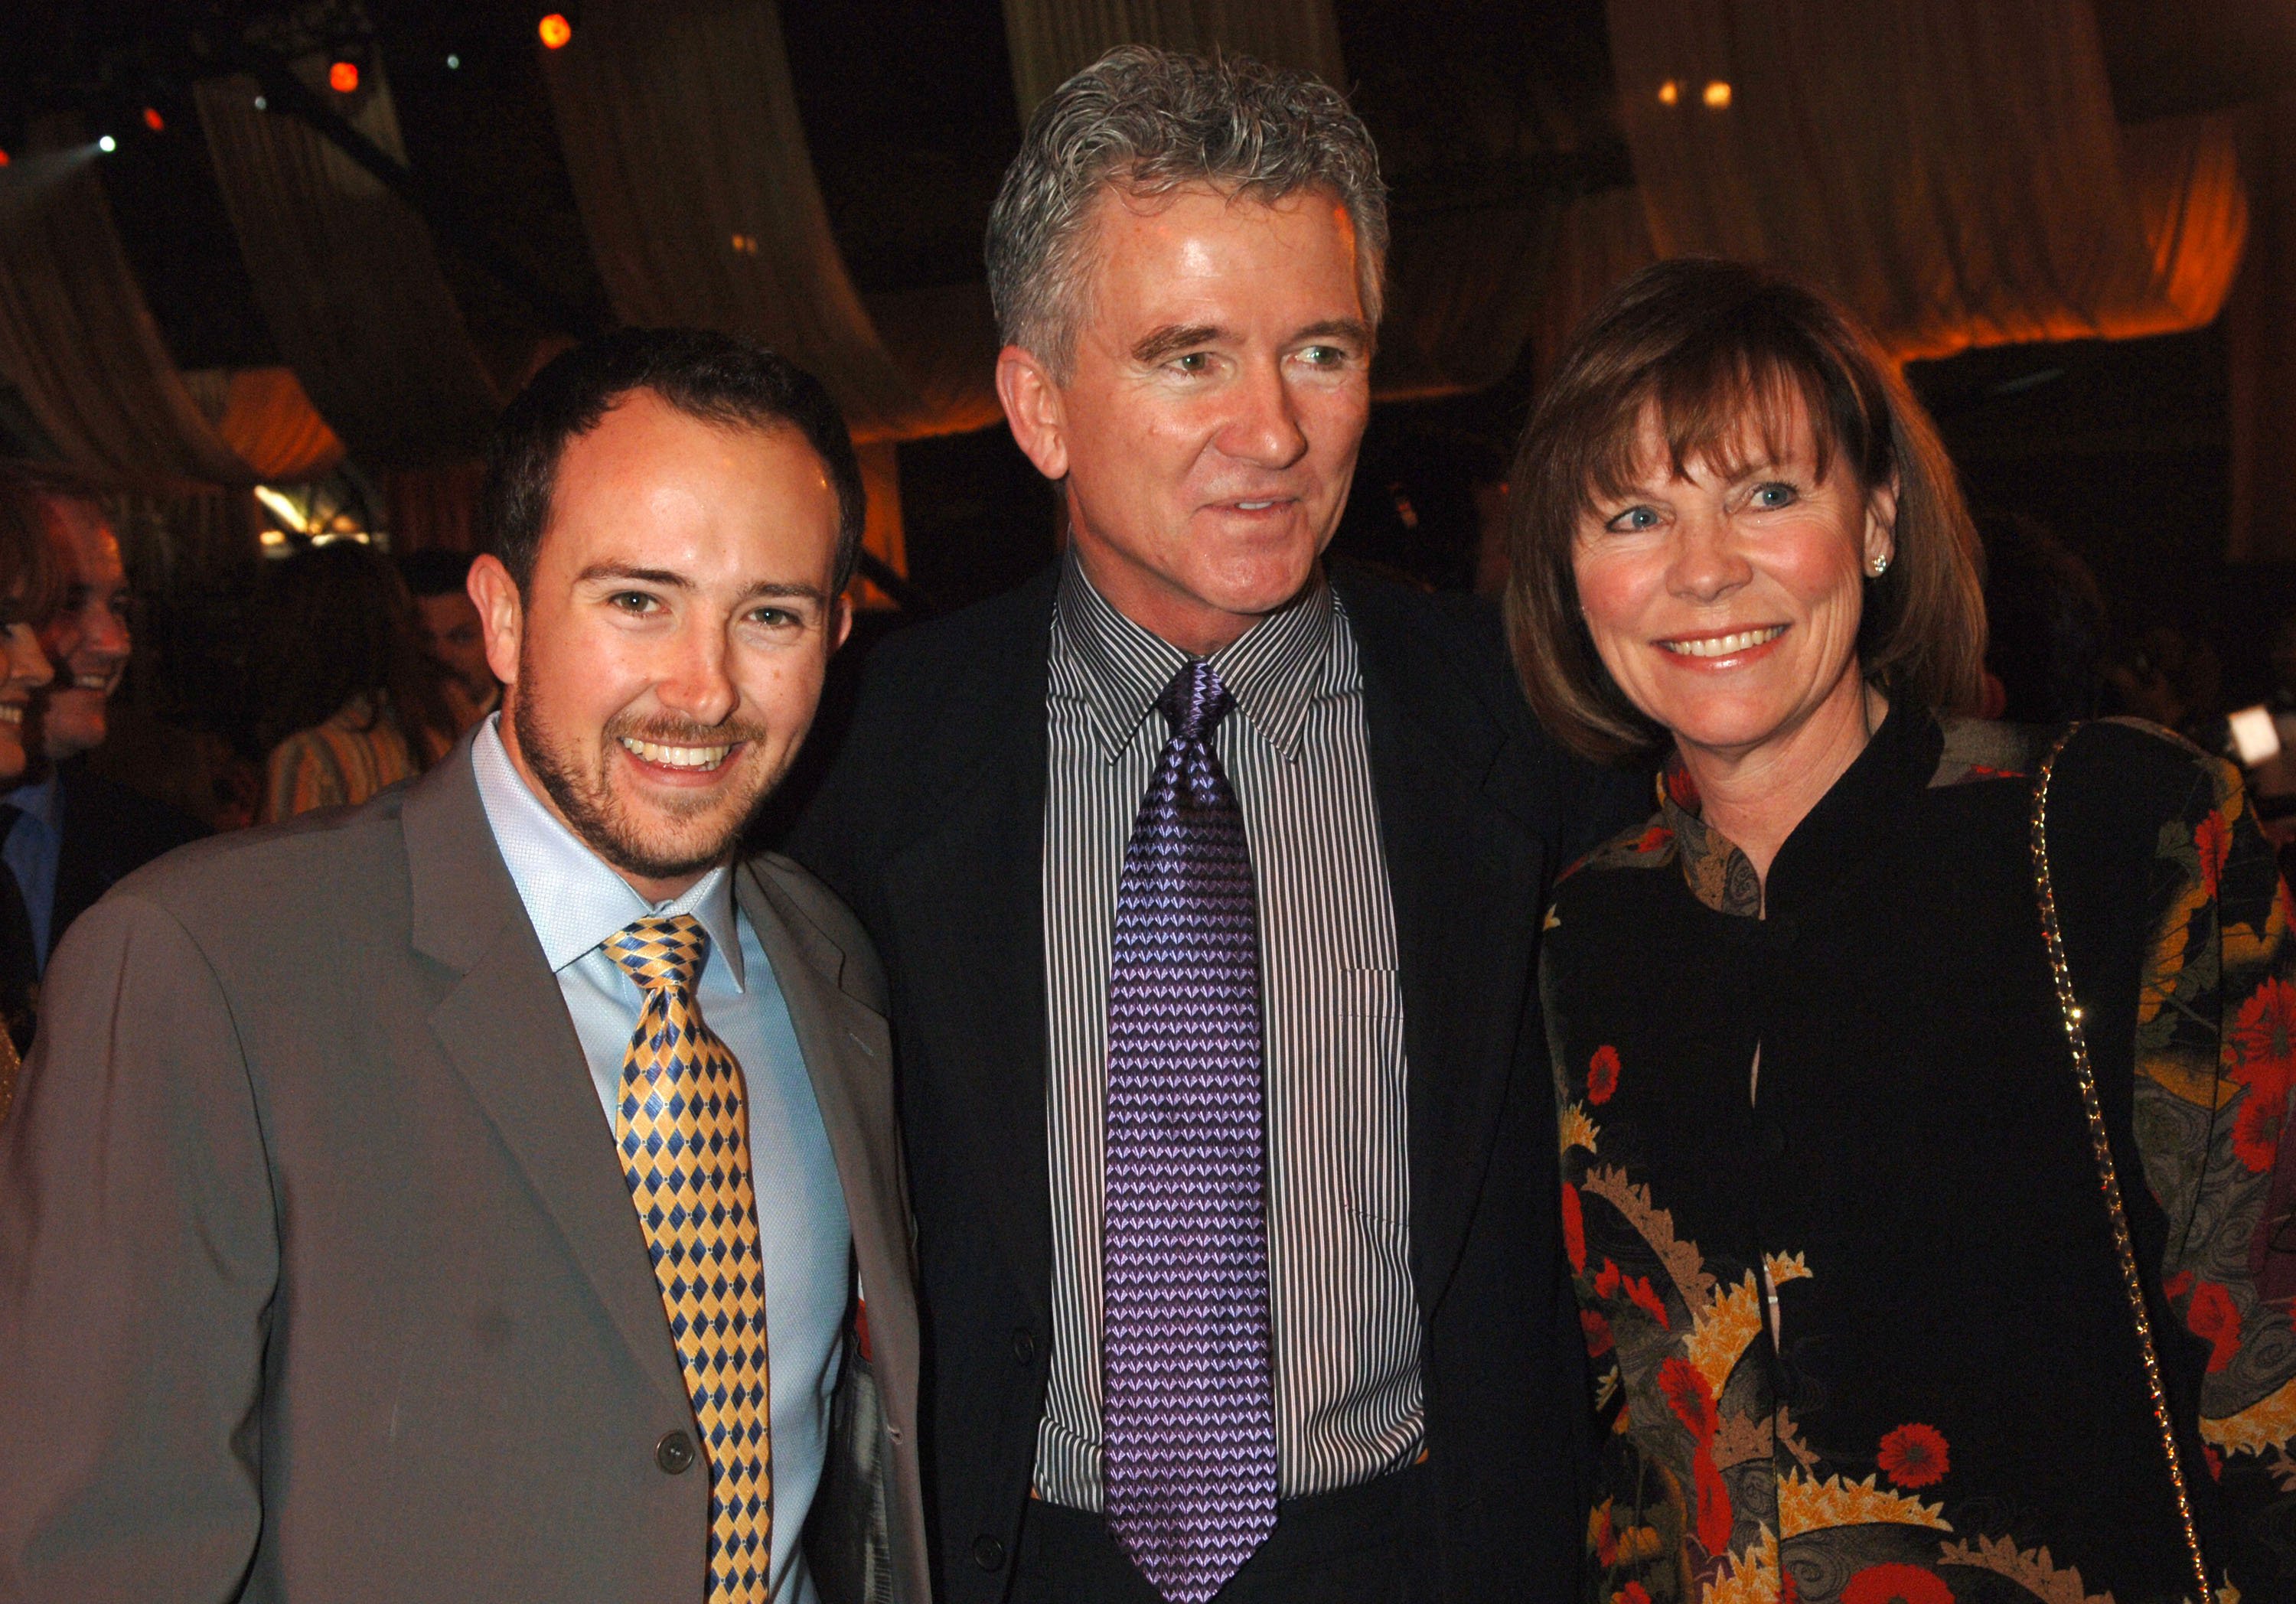 Patrick Duffy and his wife Carlyn Russer Duffy with their son Padraic Duffy at 2006 TV Land Awards. | Source: Getty Images